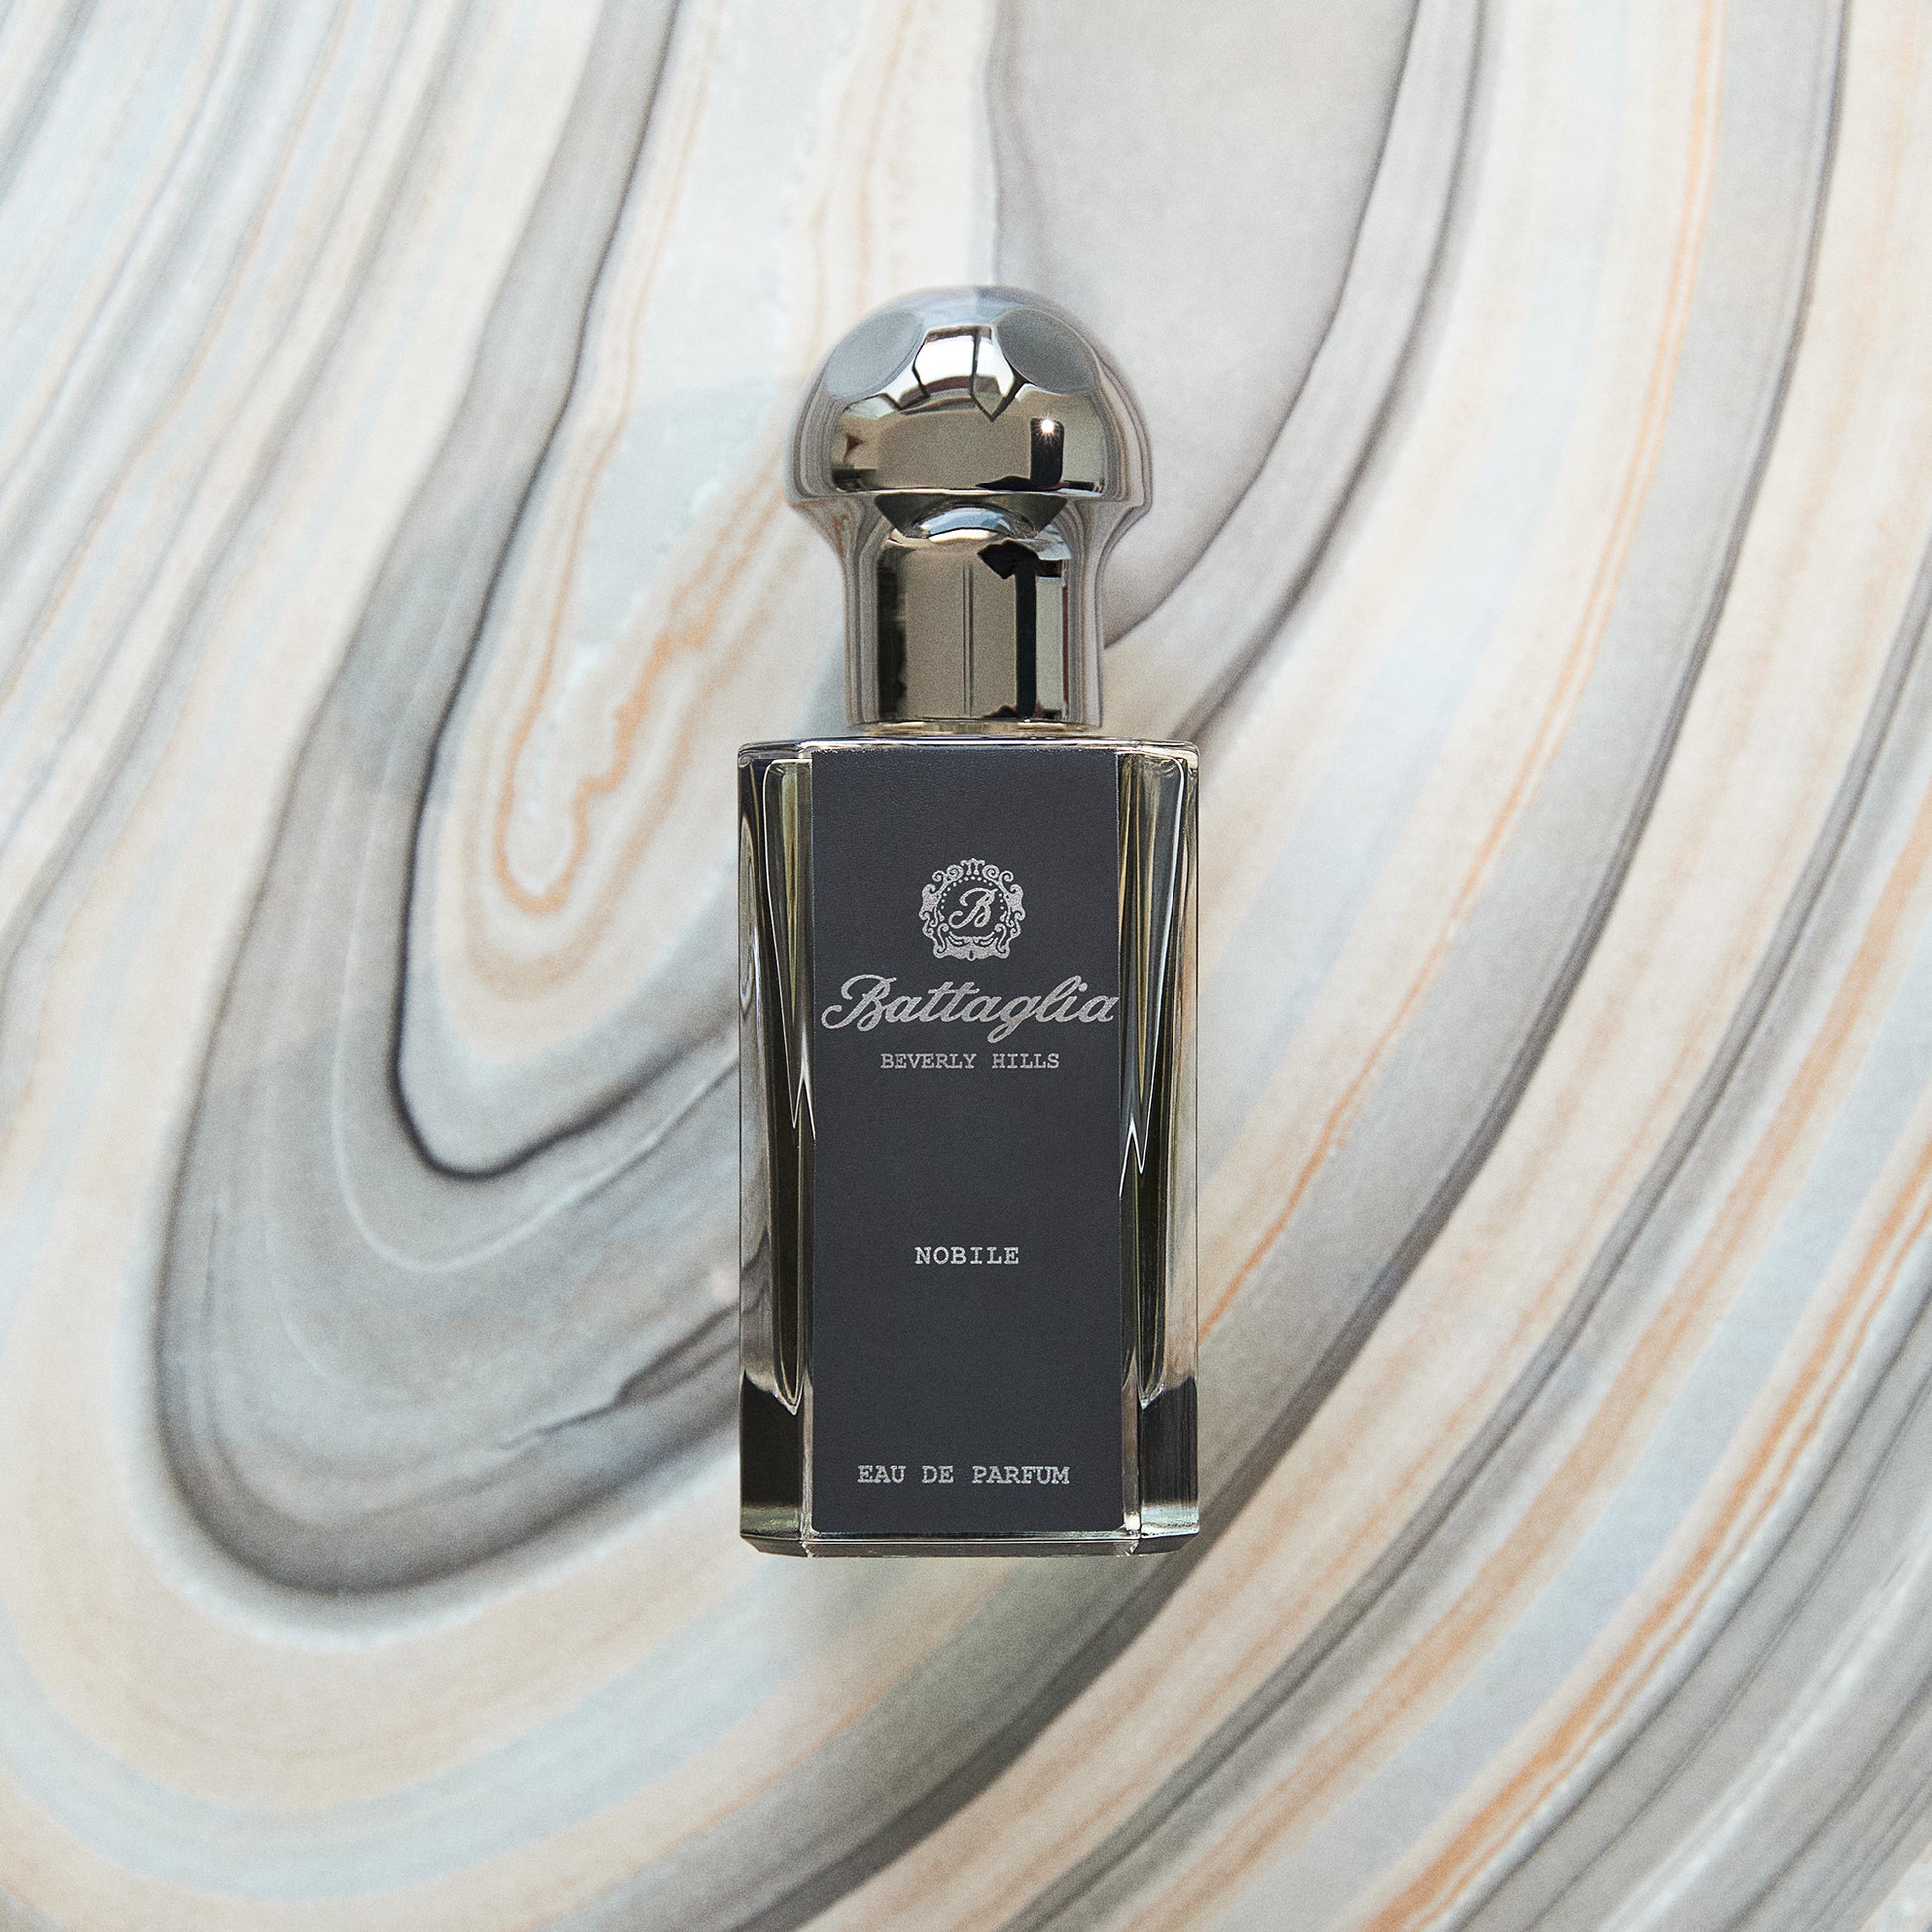 A photo of the Nobile fragrance by Battaglia against a grey marbled paper background.  The bottle is rectangular and black with a grey circular top. 